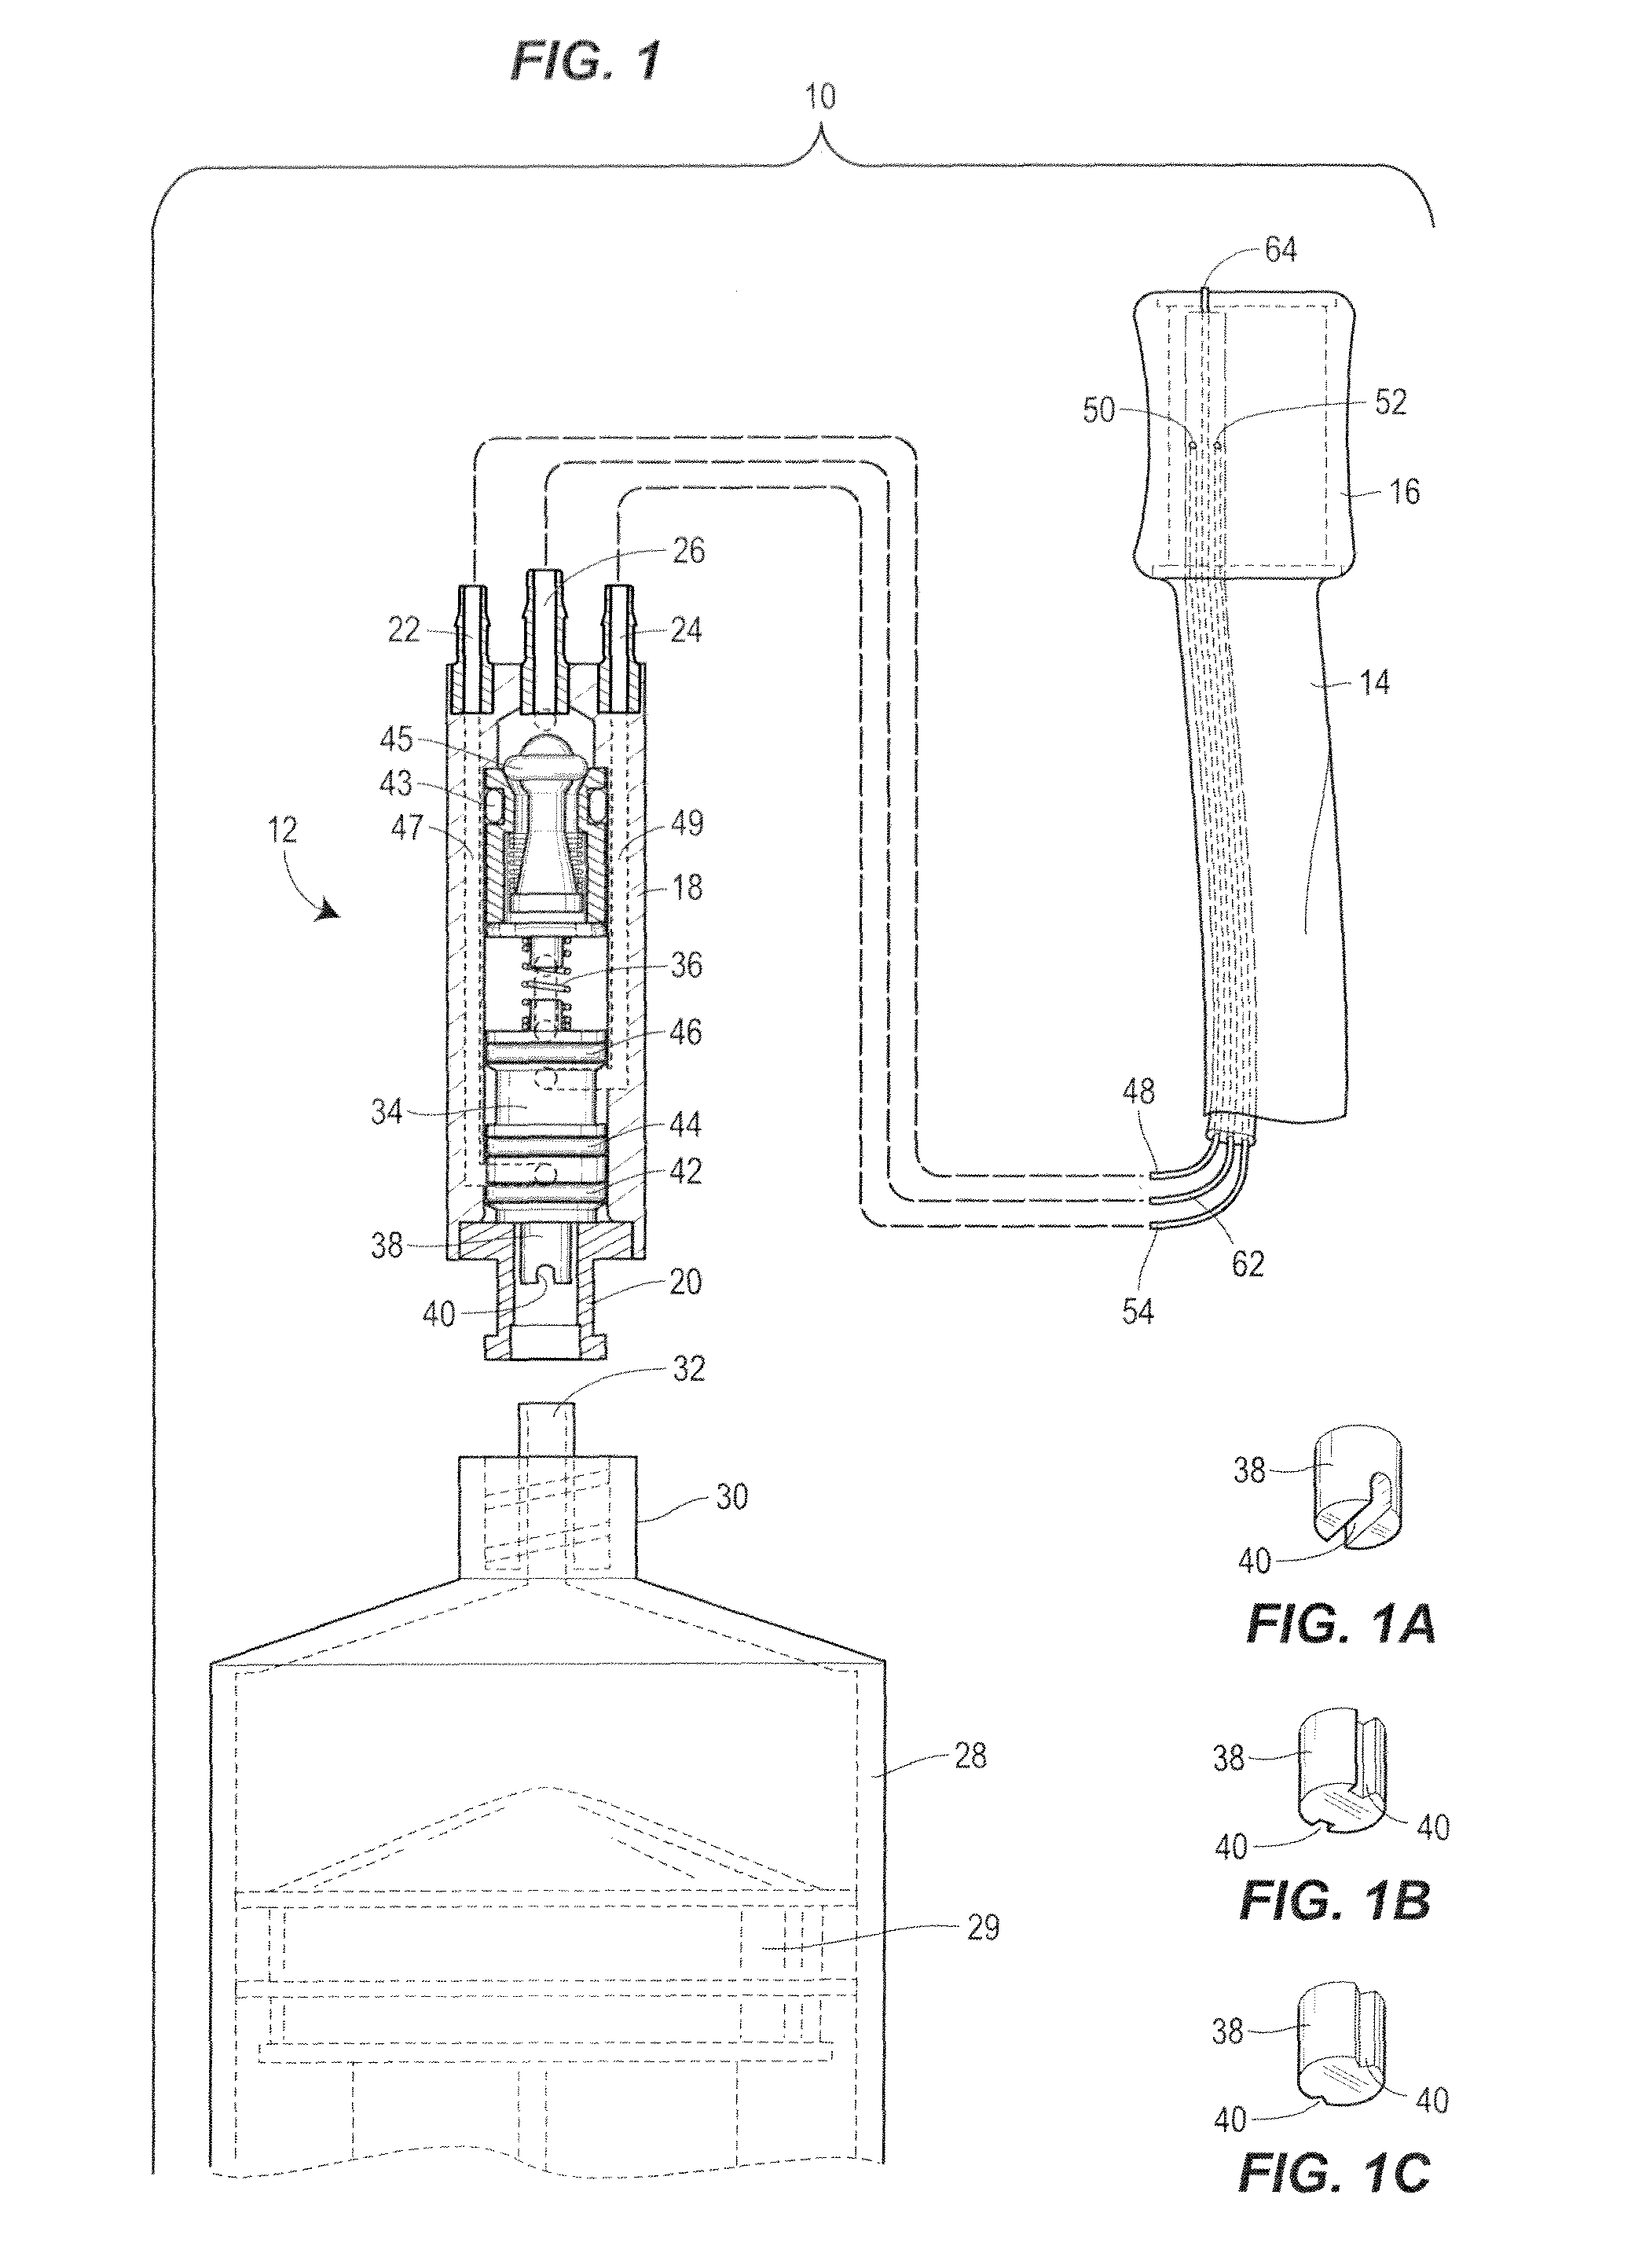 Inflation cuff with transient-resistant over-pressure preventor